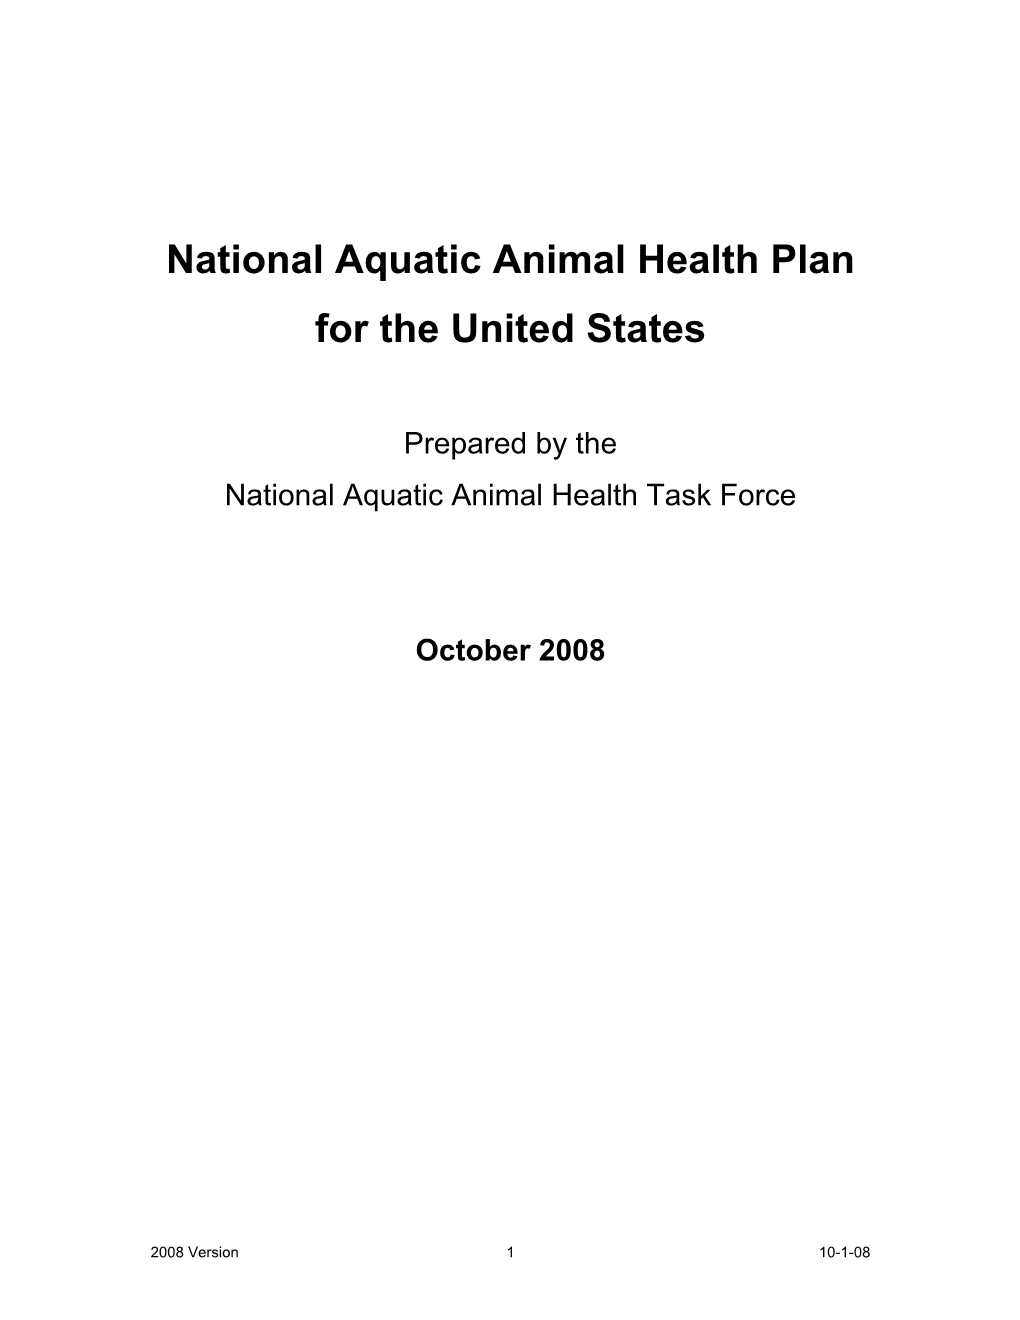 National Aquatic Animal Health Plan for the United States